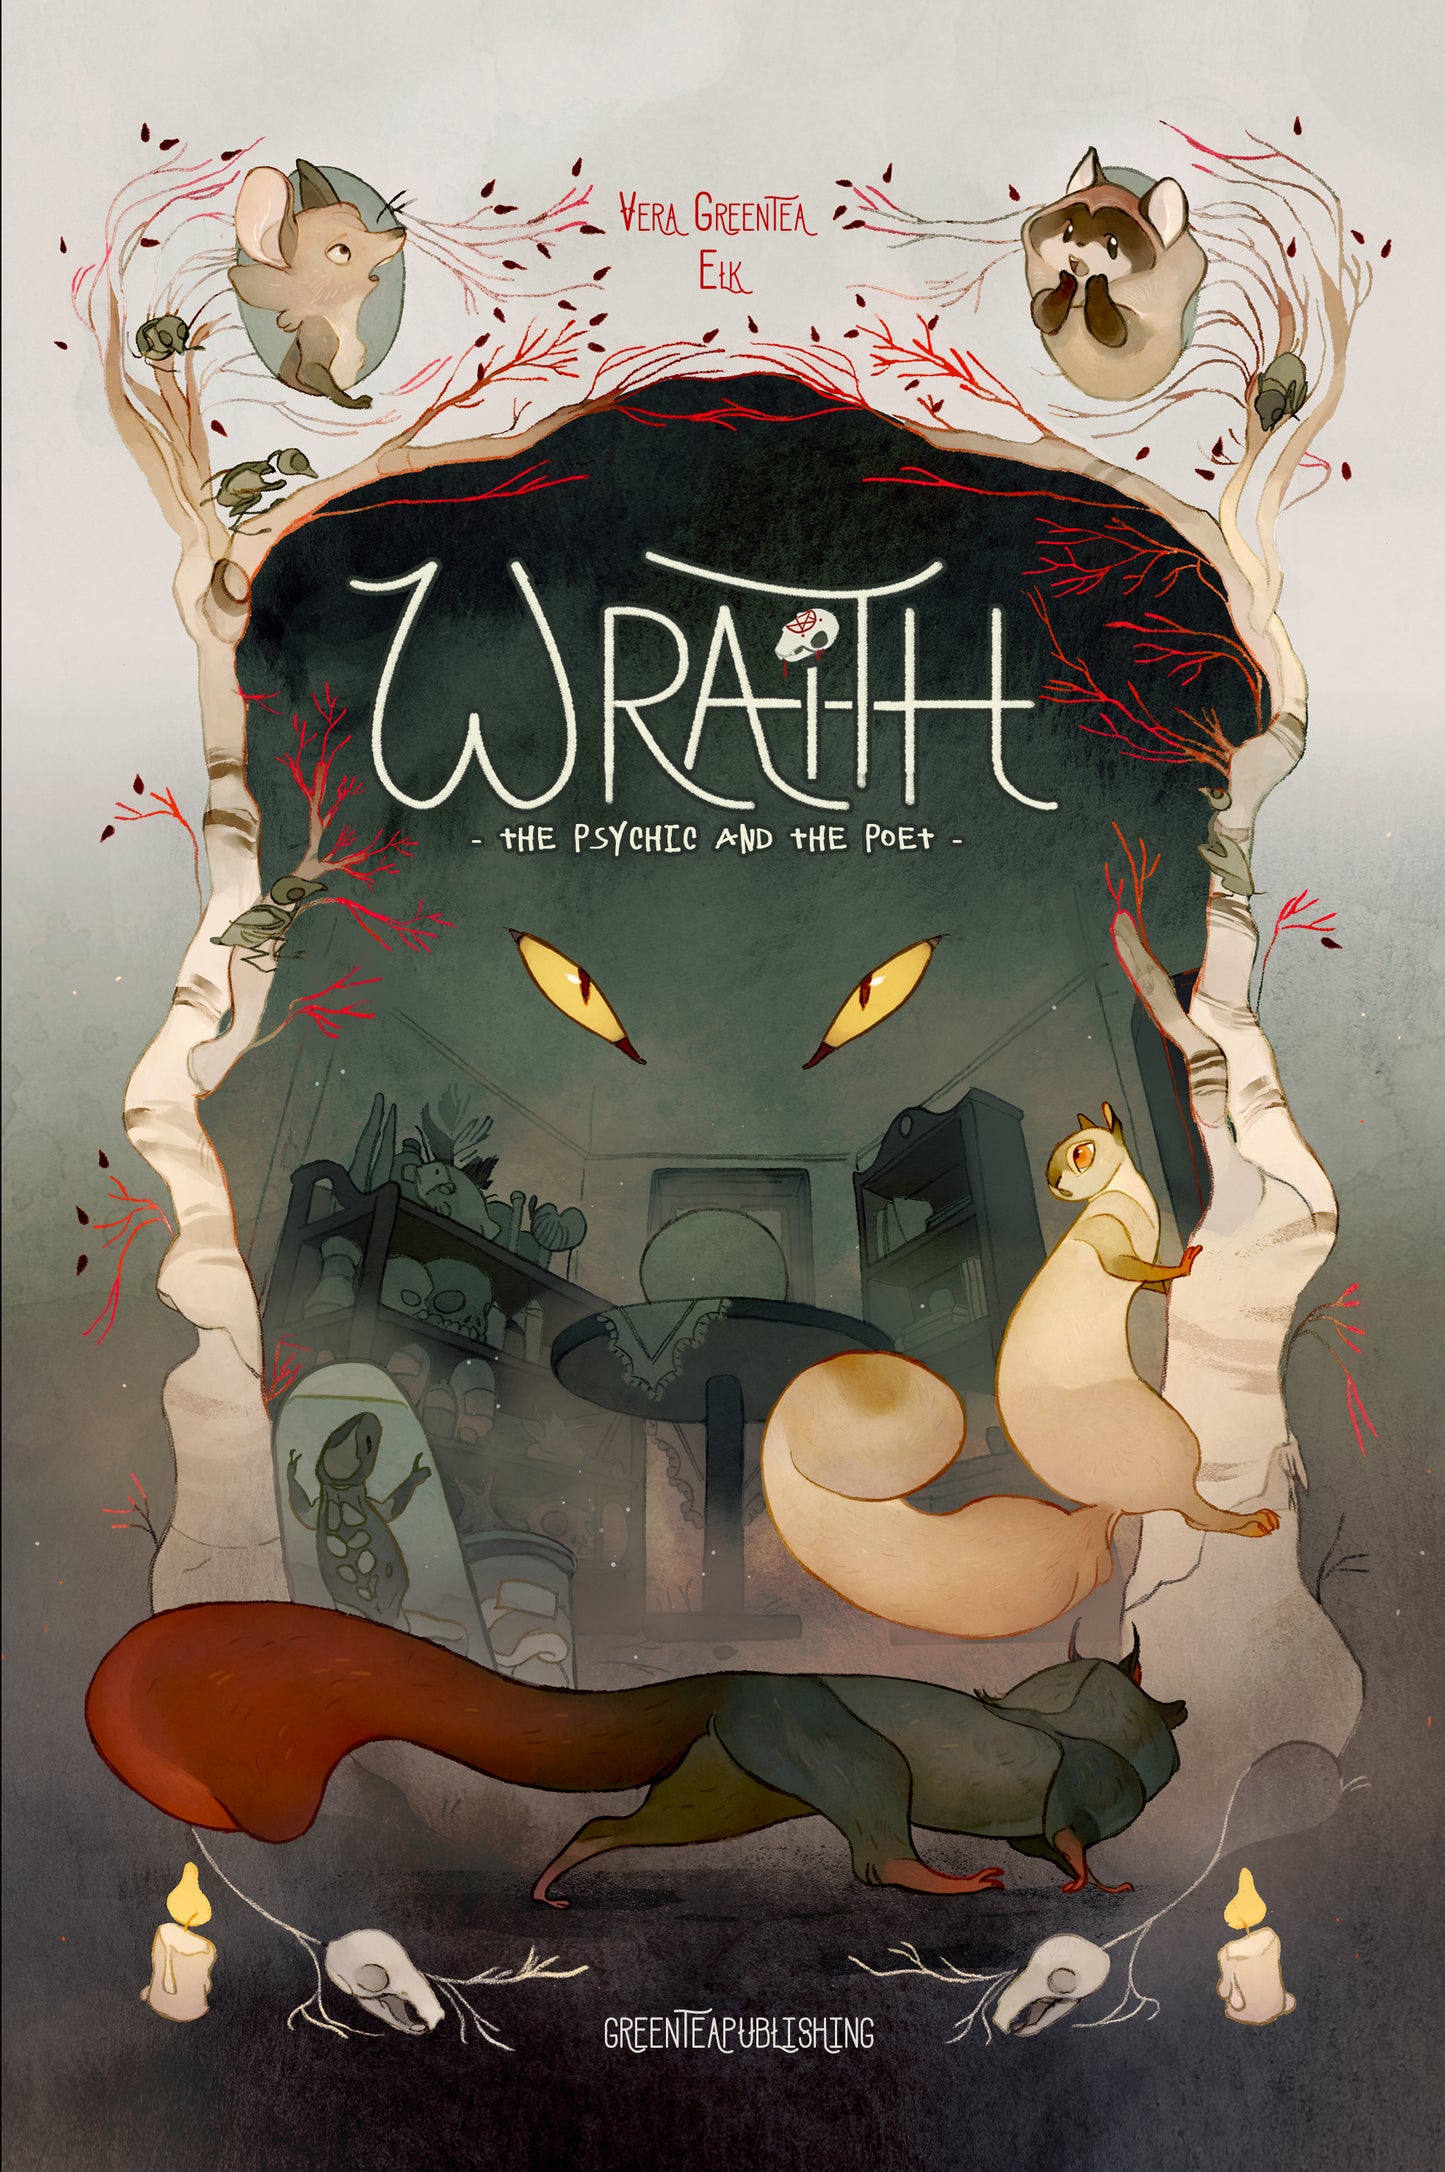 Wraith: The Psychic and the Poet